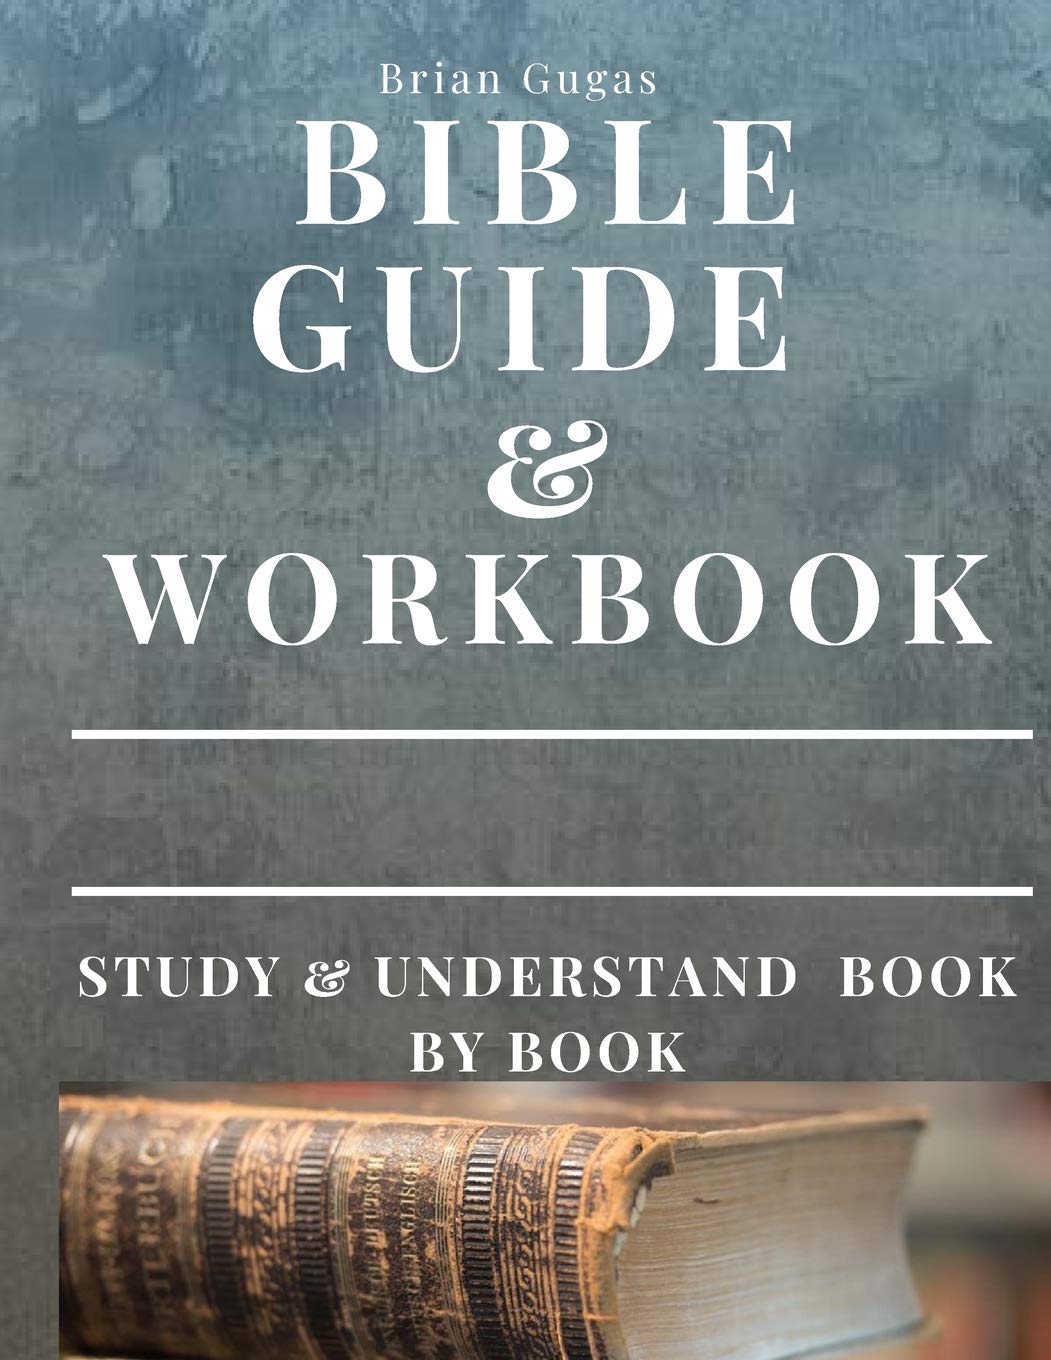 Bible Workbook and Guide: Study and Understand Book by Book (The Bible Study Book)